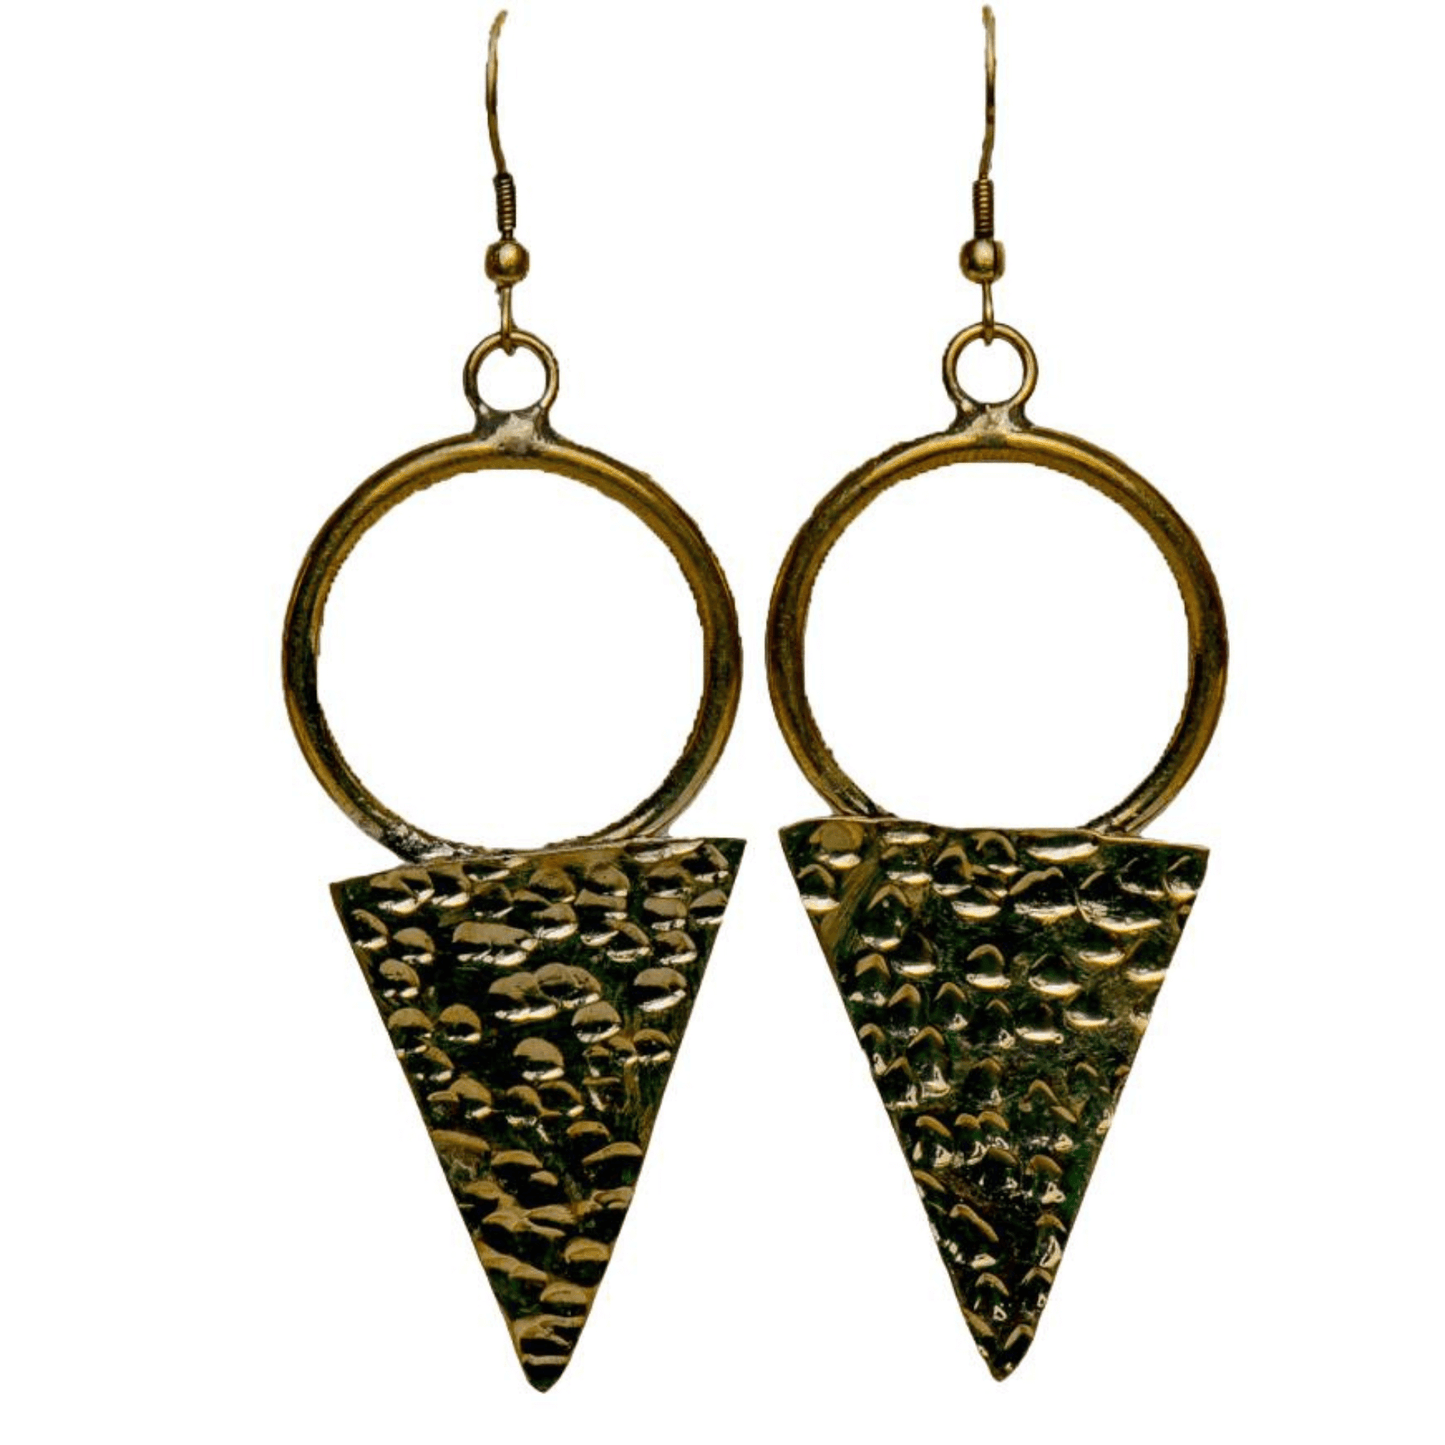 Long triangle earrings handmade with gold plated brass.